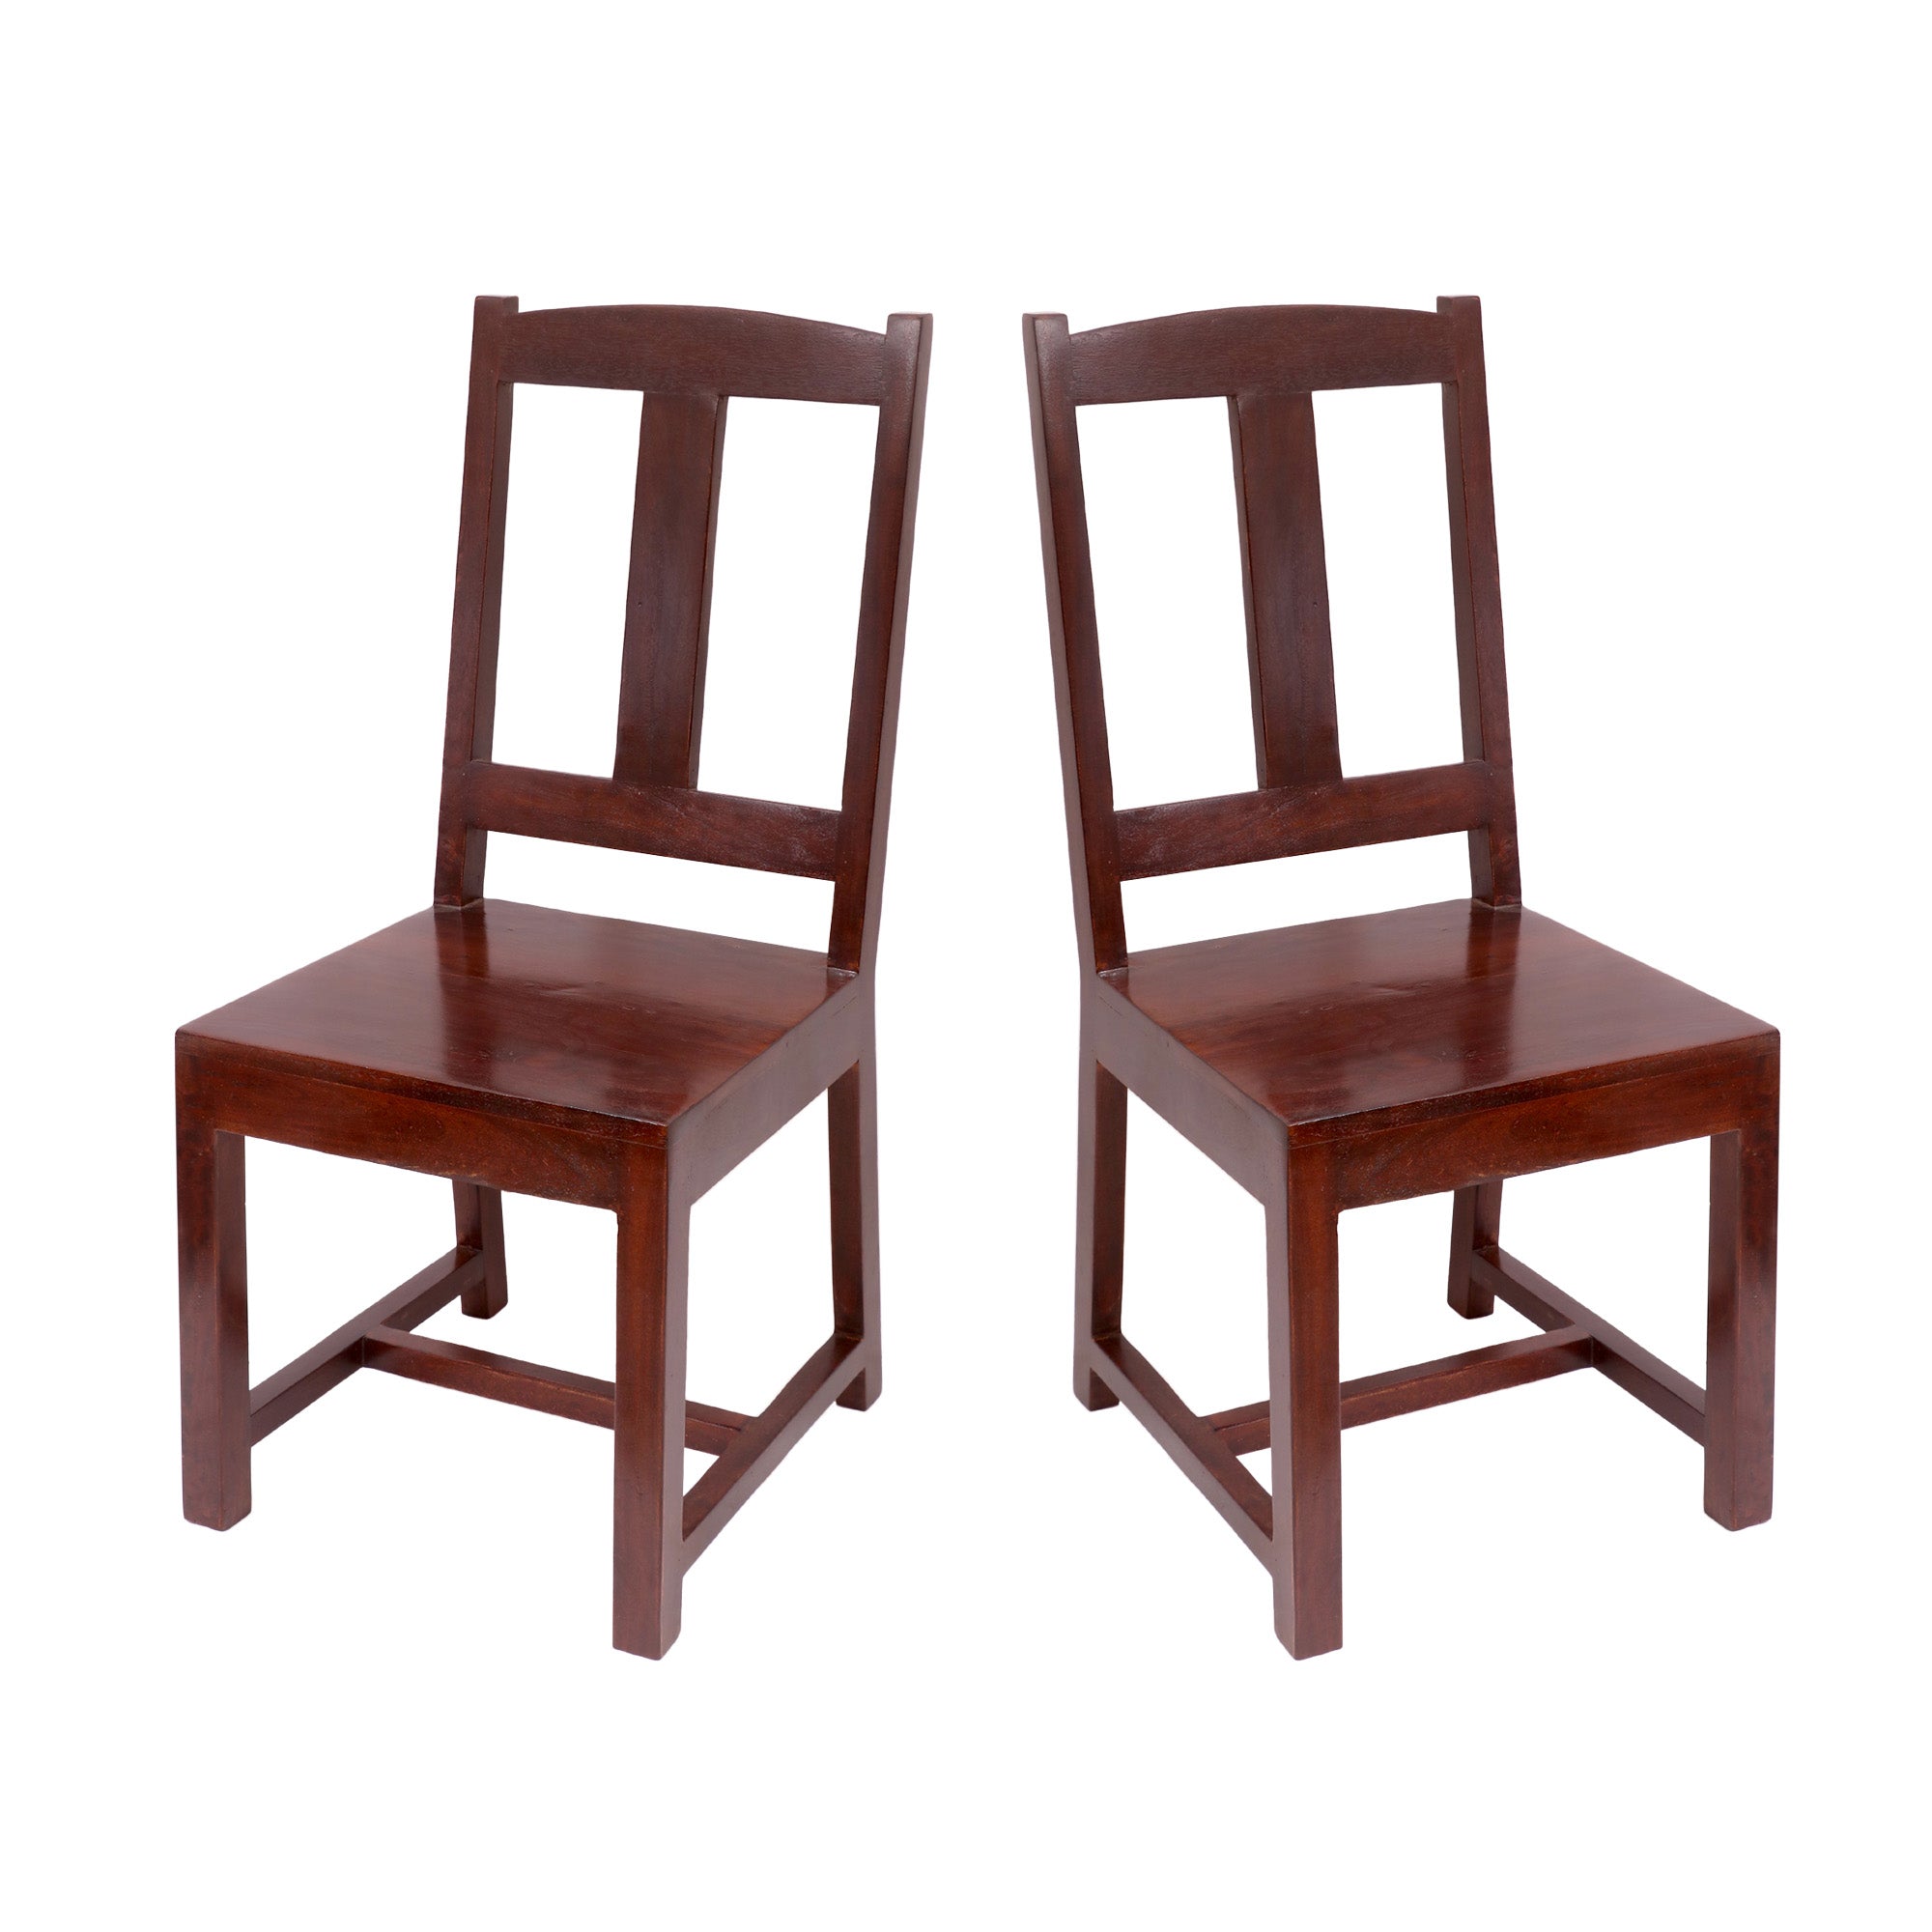 (Set of 2) Natural Tone Simple Country Wood Chair Dining Chair